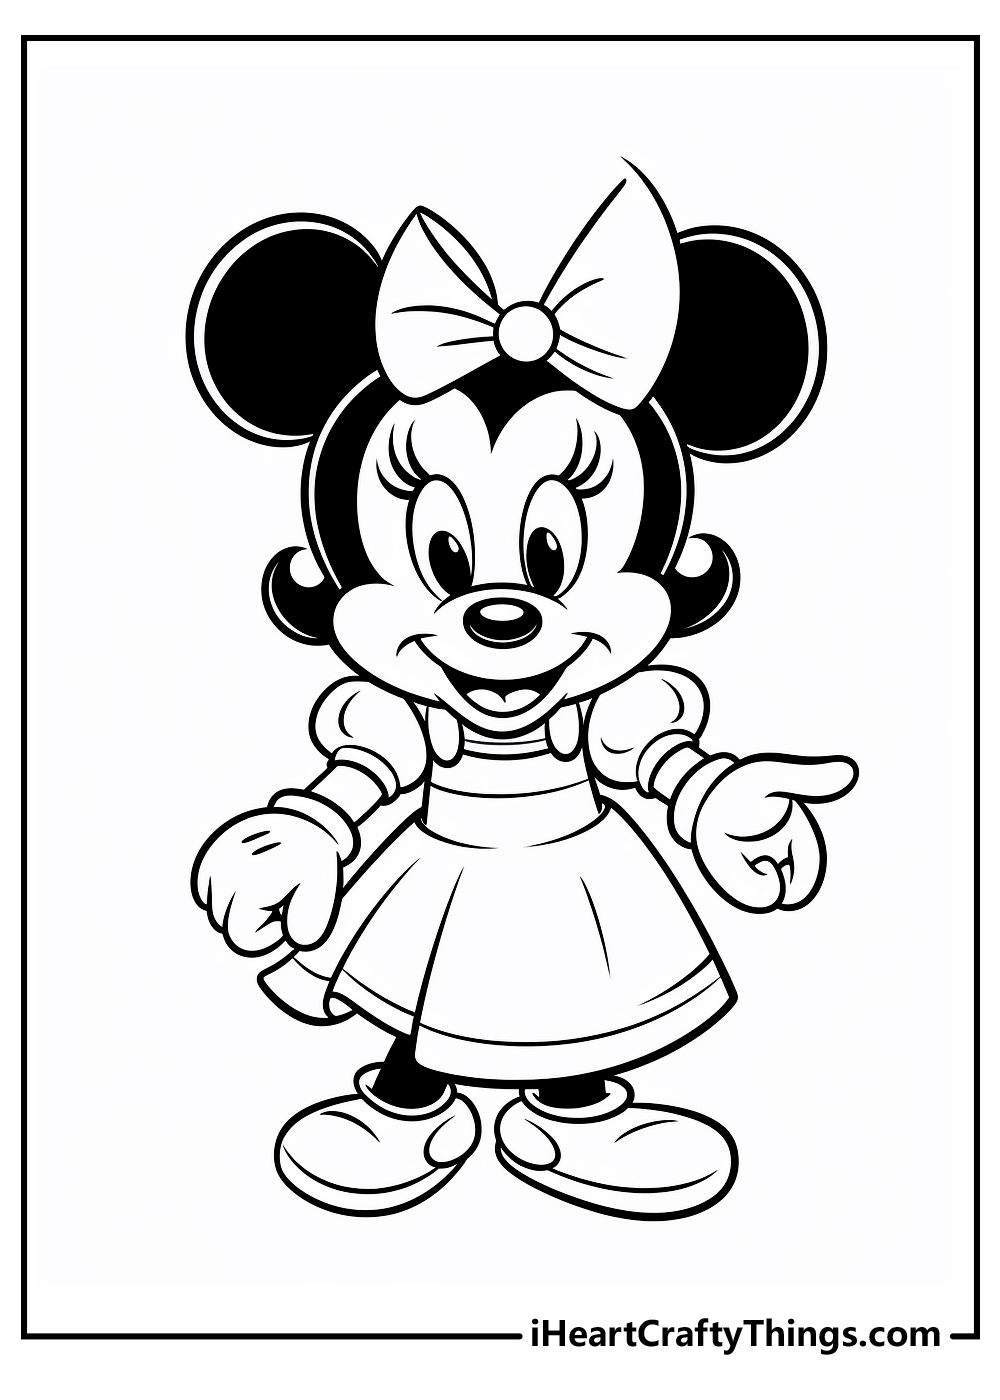 Minnie mouse coloring pages free printables